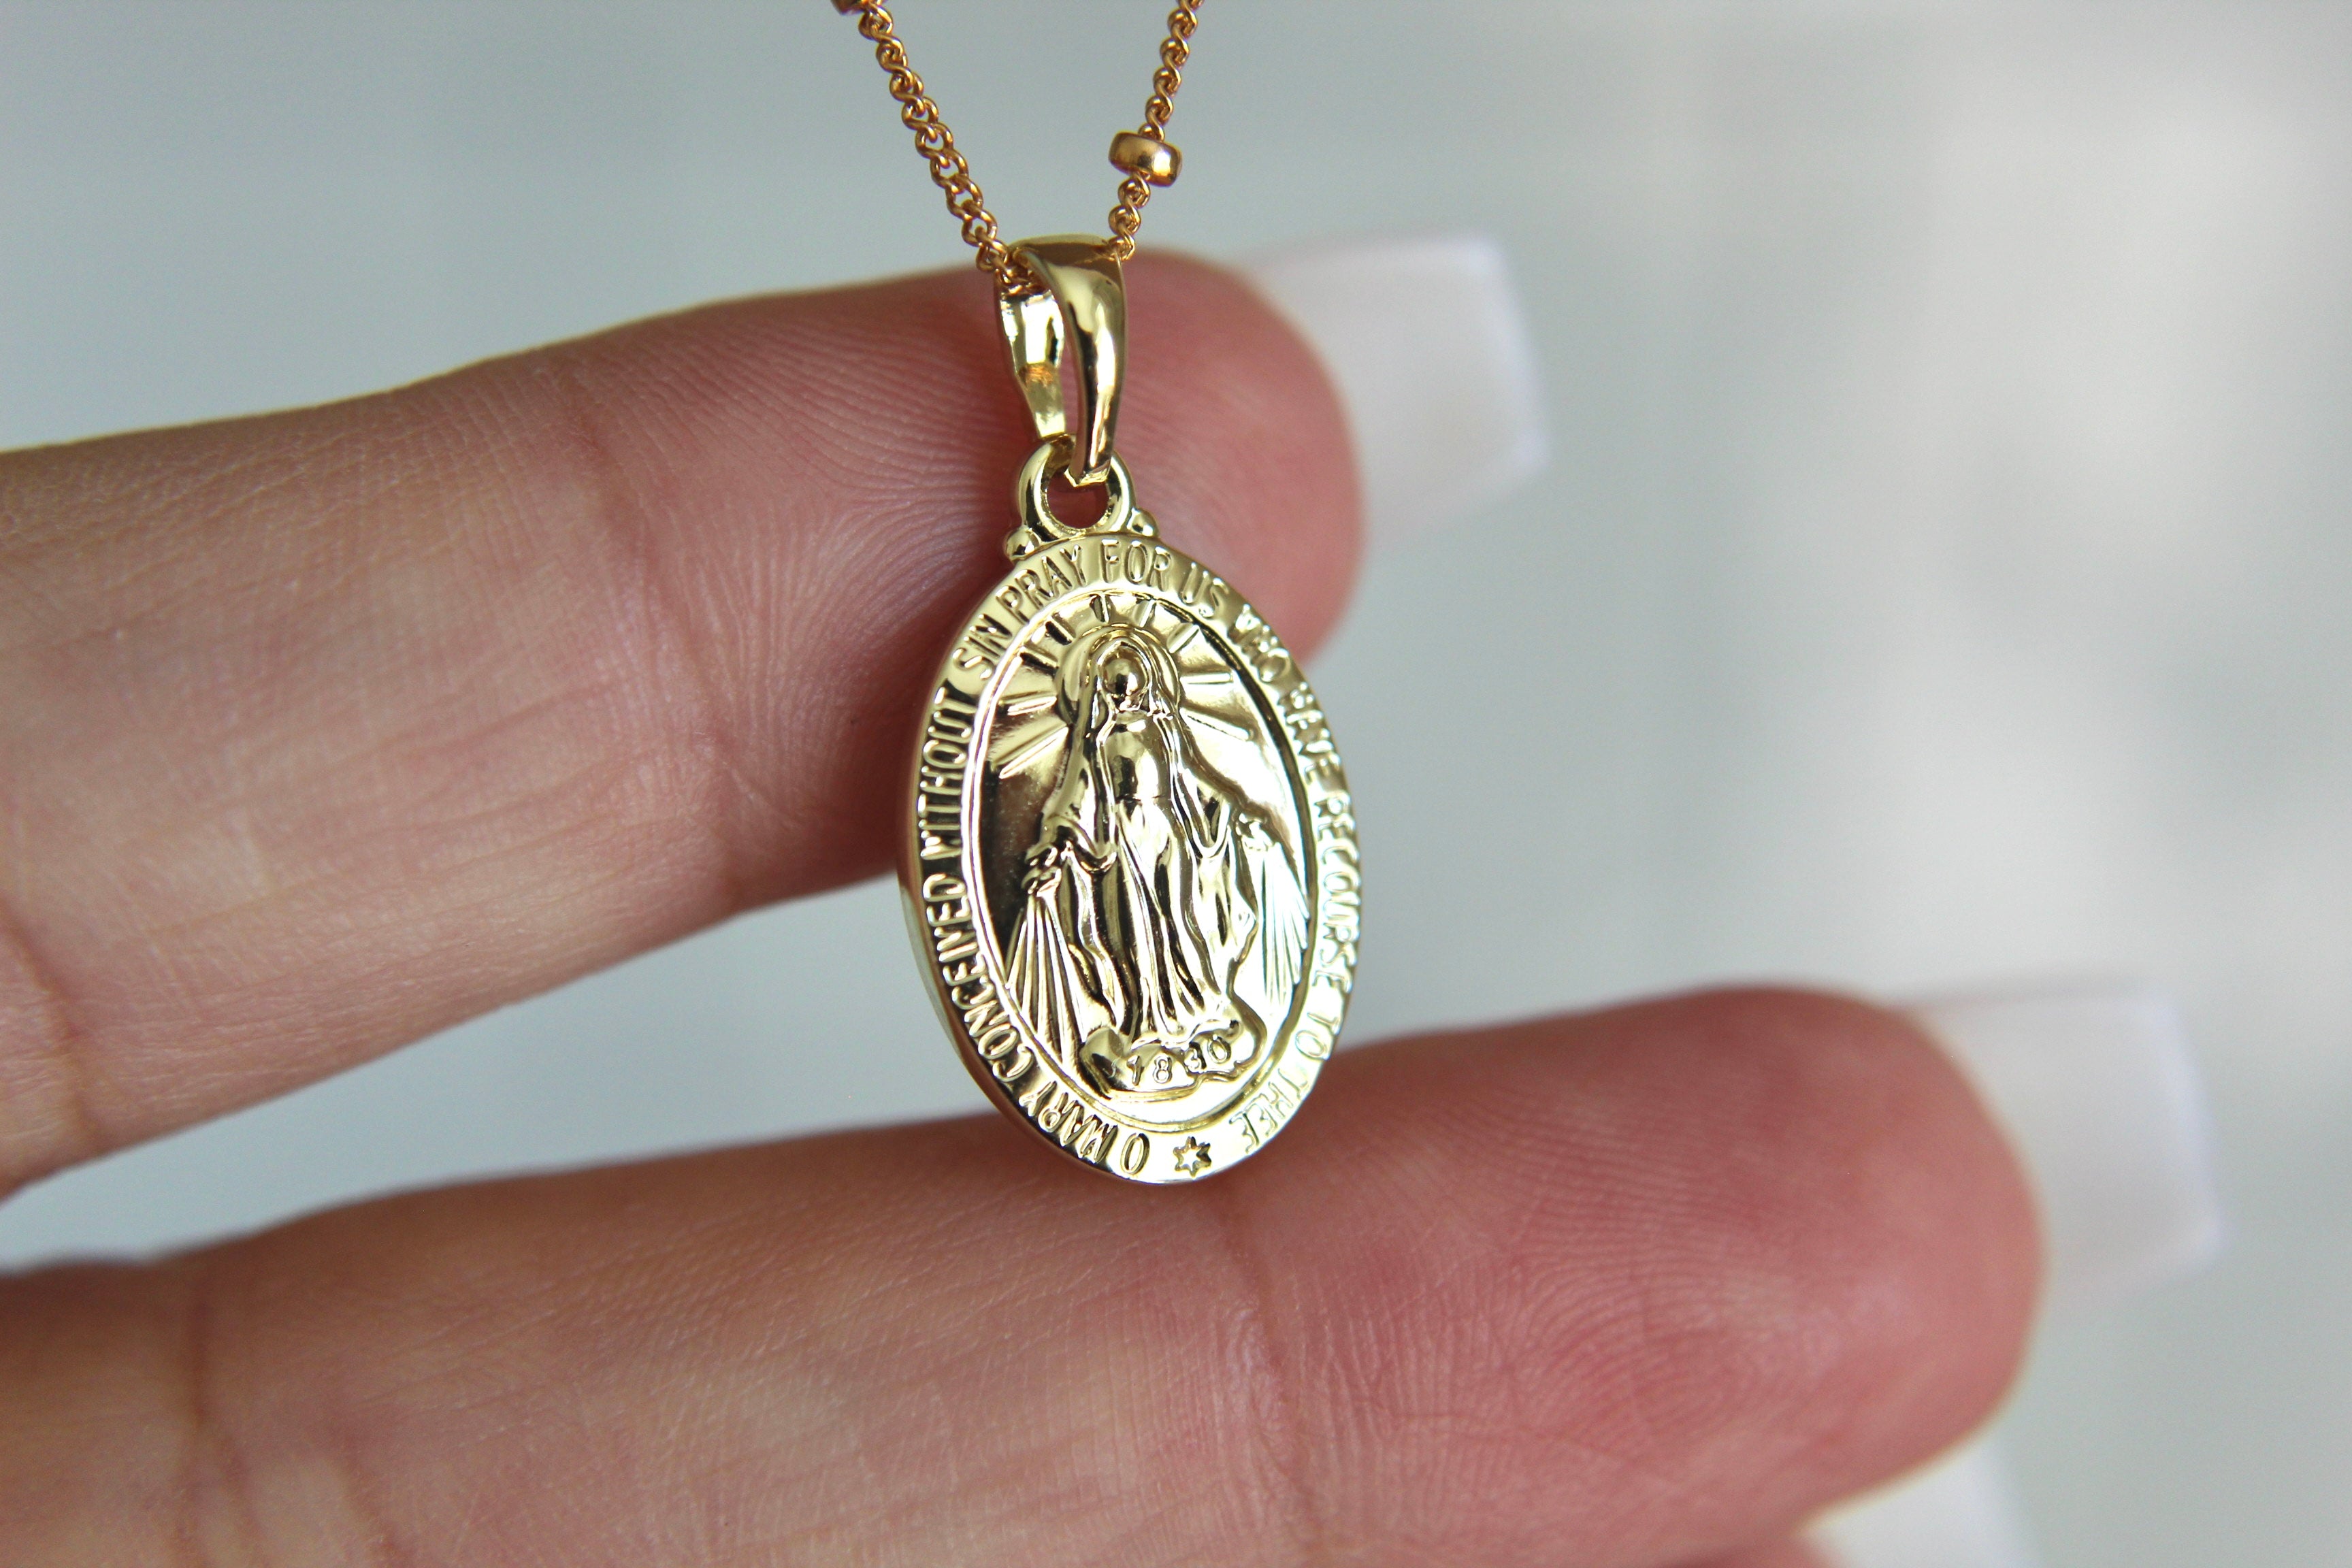 Miraculous - Medals - Catholic Jewelry